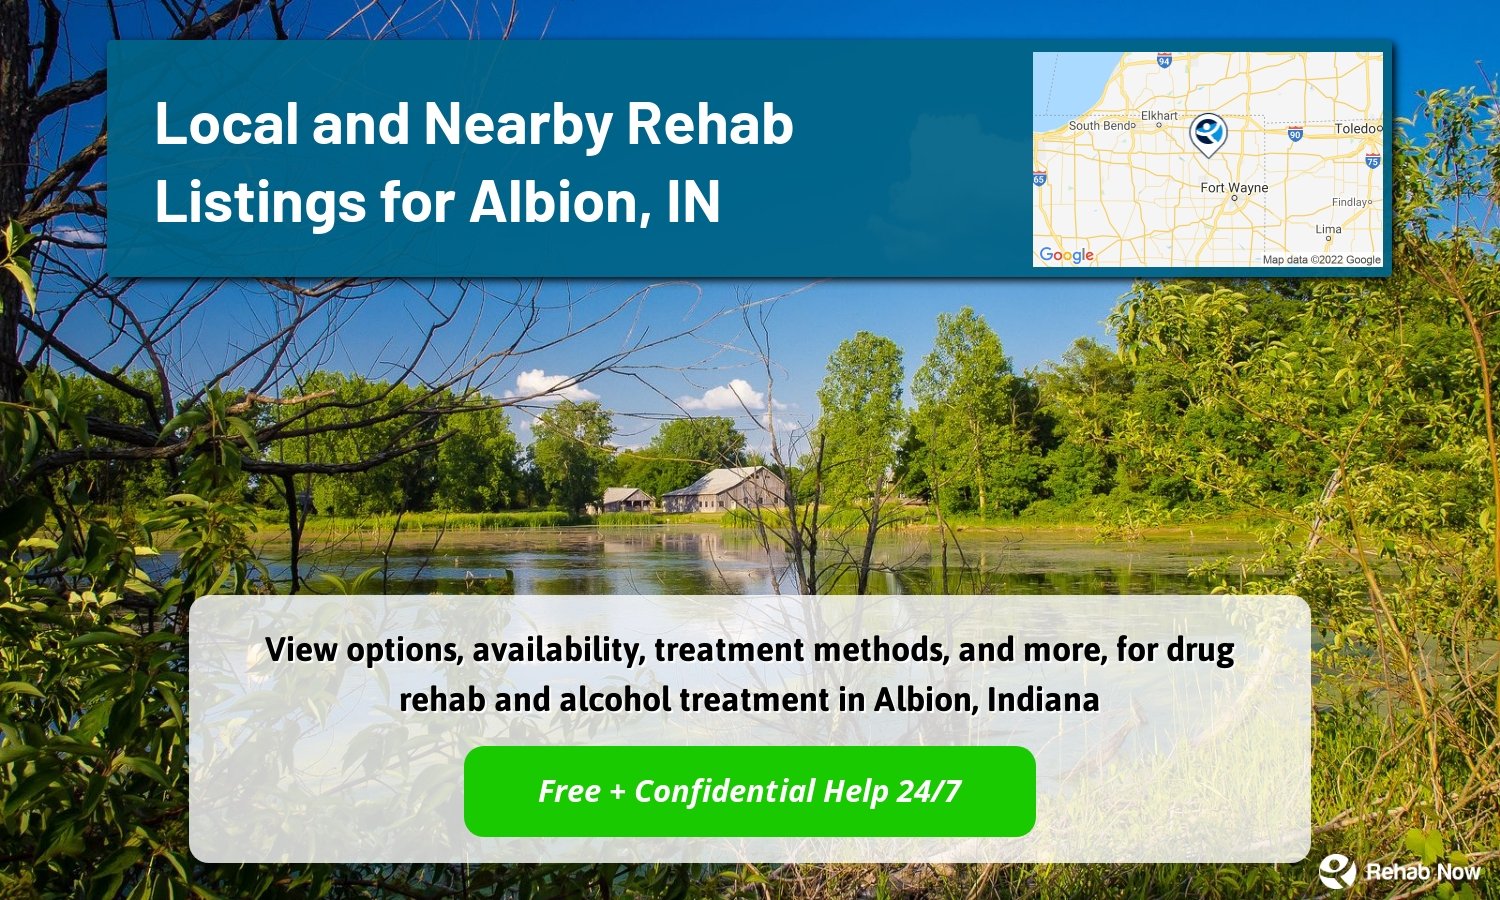 View options, availability, treatment methods, and more, for drug rehab and alcohol treatment in Albion, Indiana